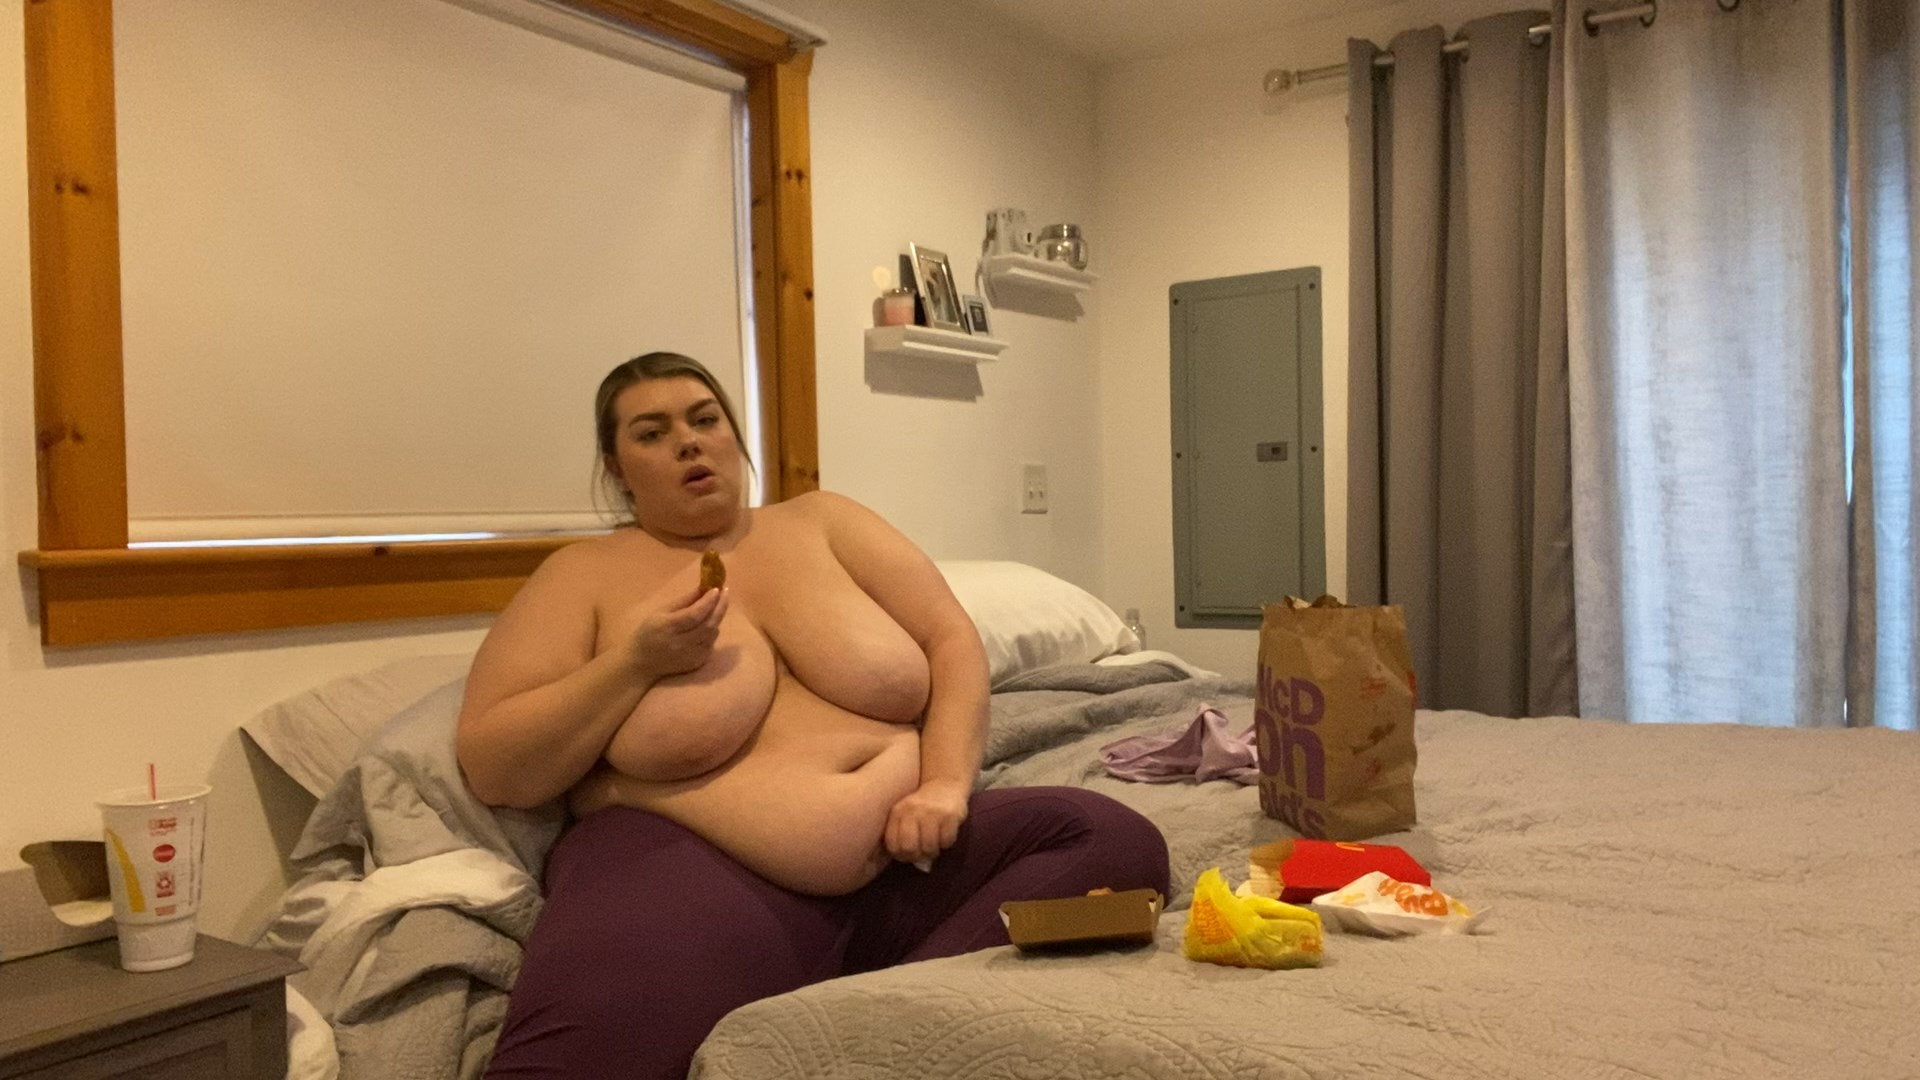 Stuffing With Mickey Ds 1080p - Chloe BBW